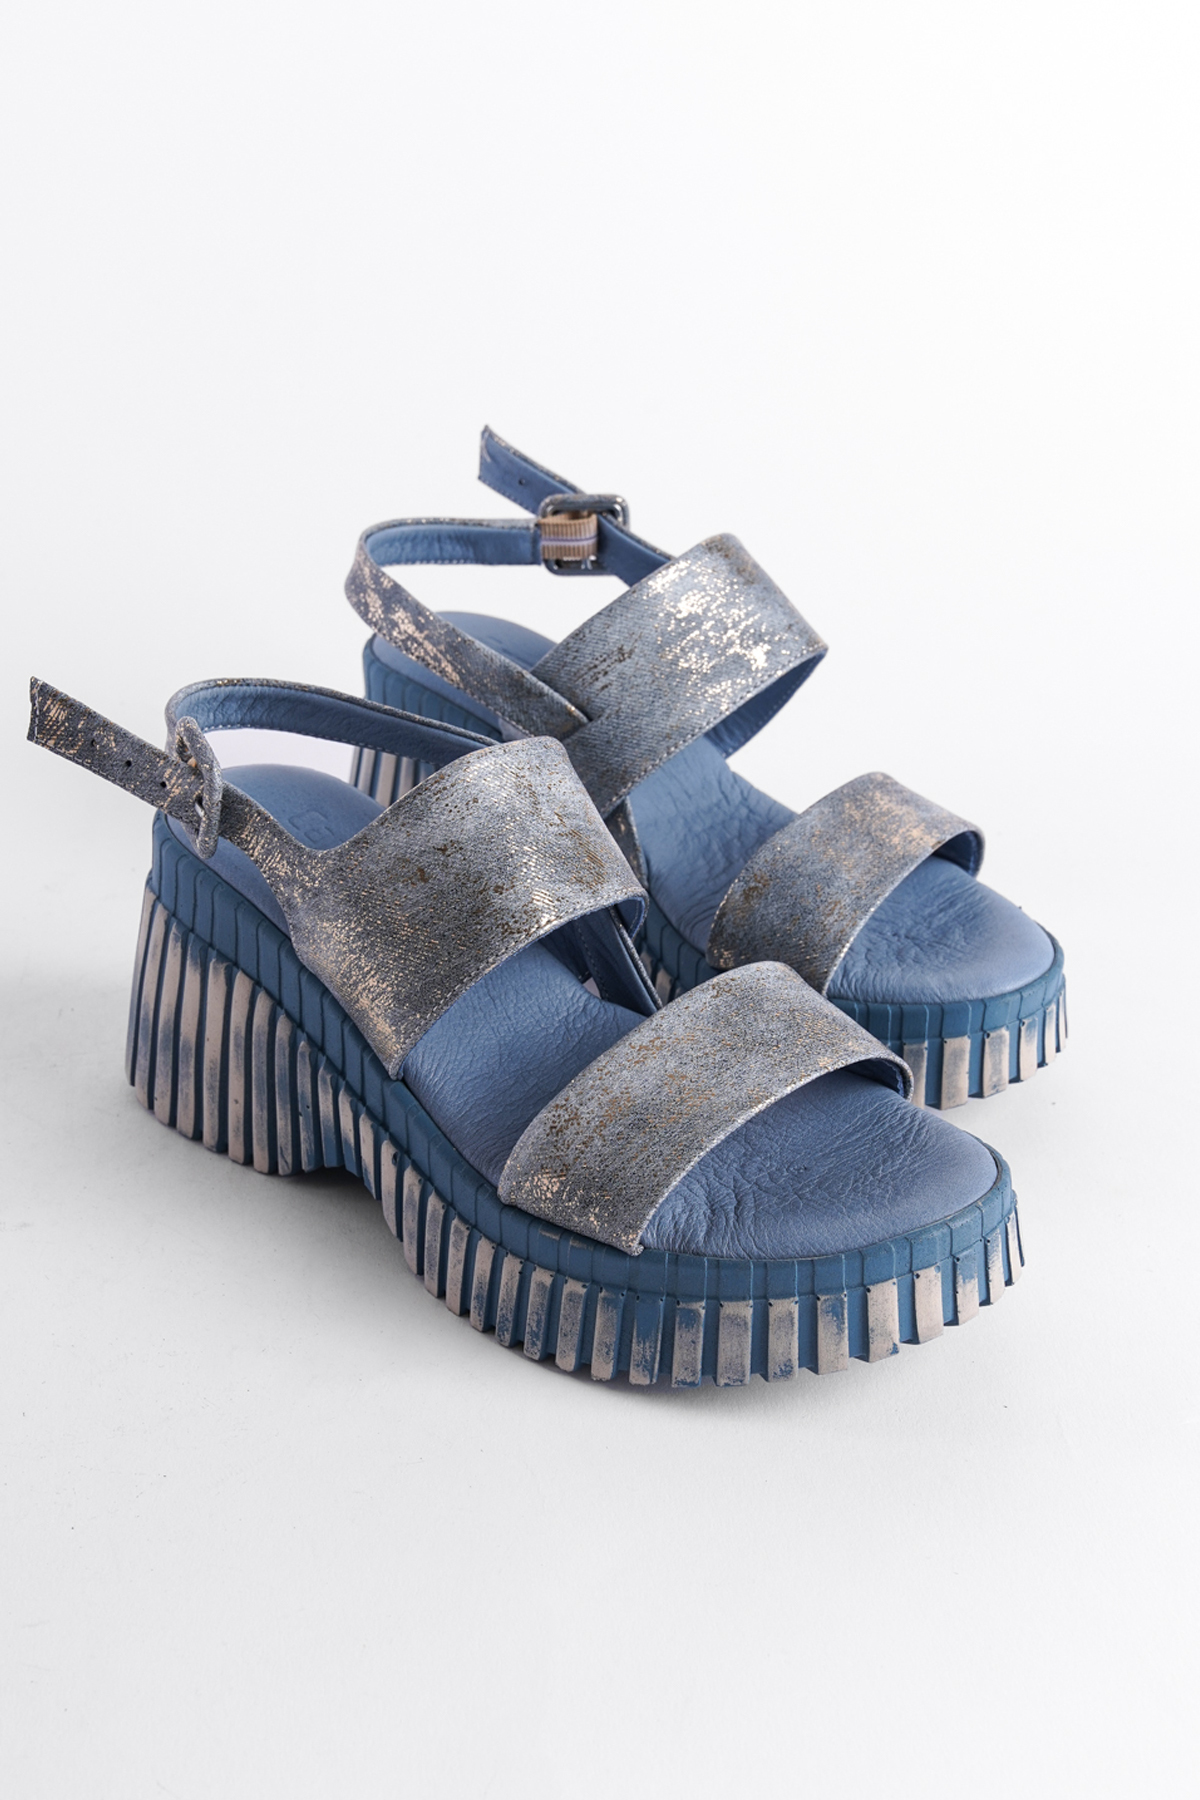 Capone Outfitters Genuine Leather Denim Double Strap Wedge Heel Women Sandals